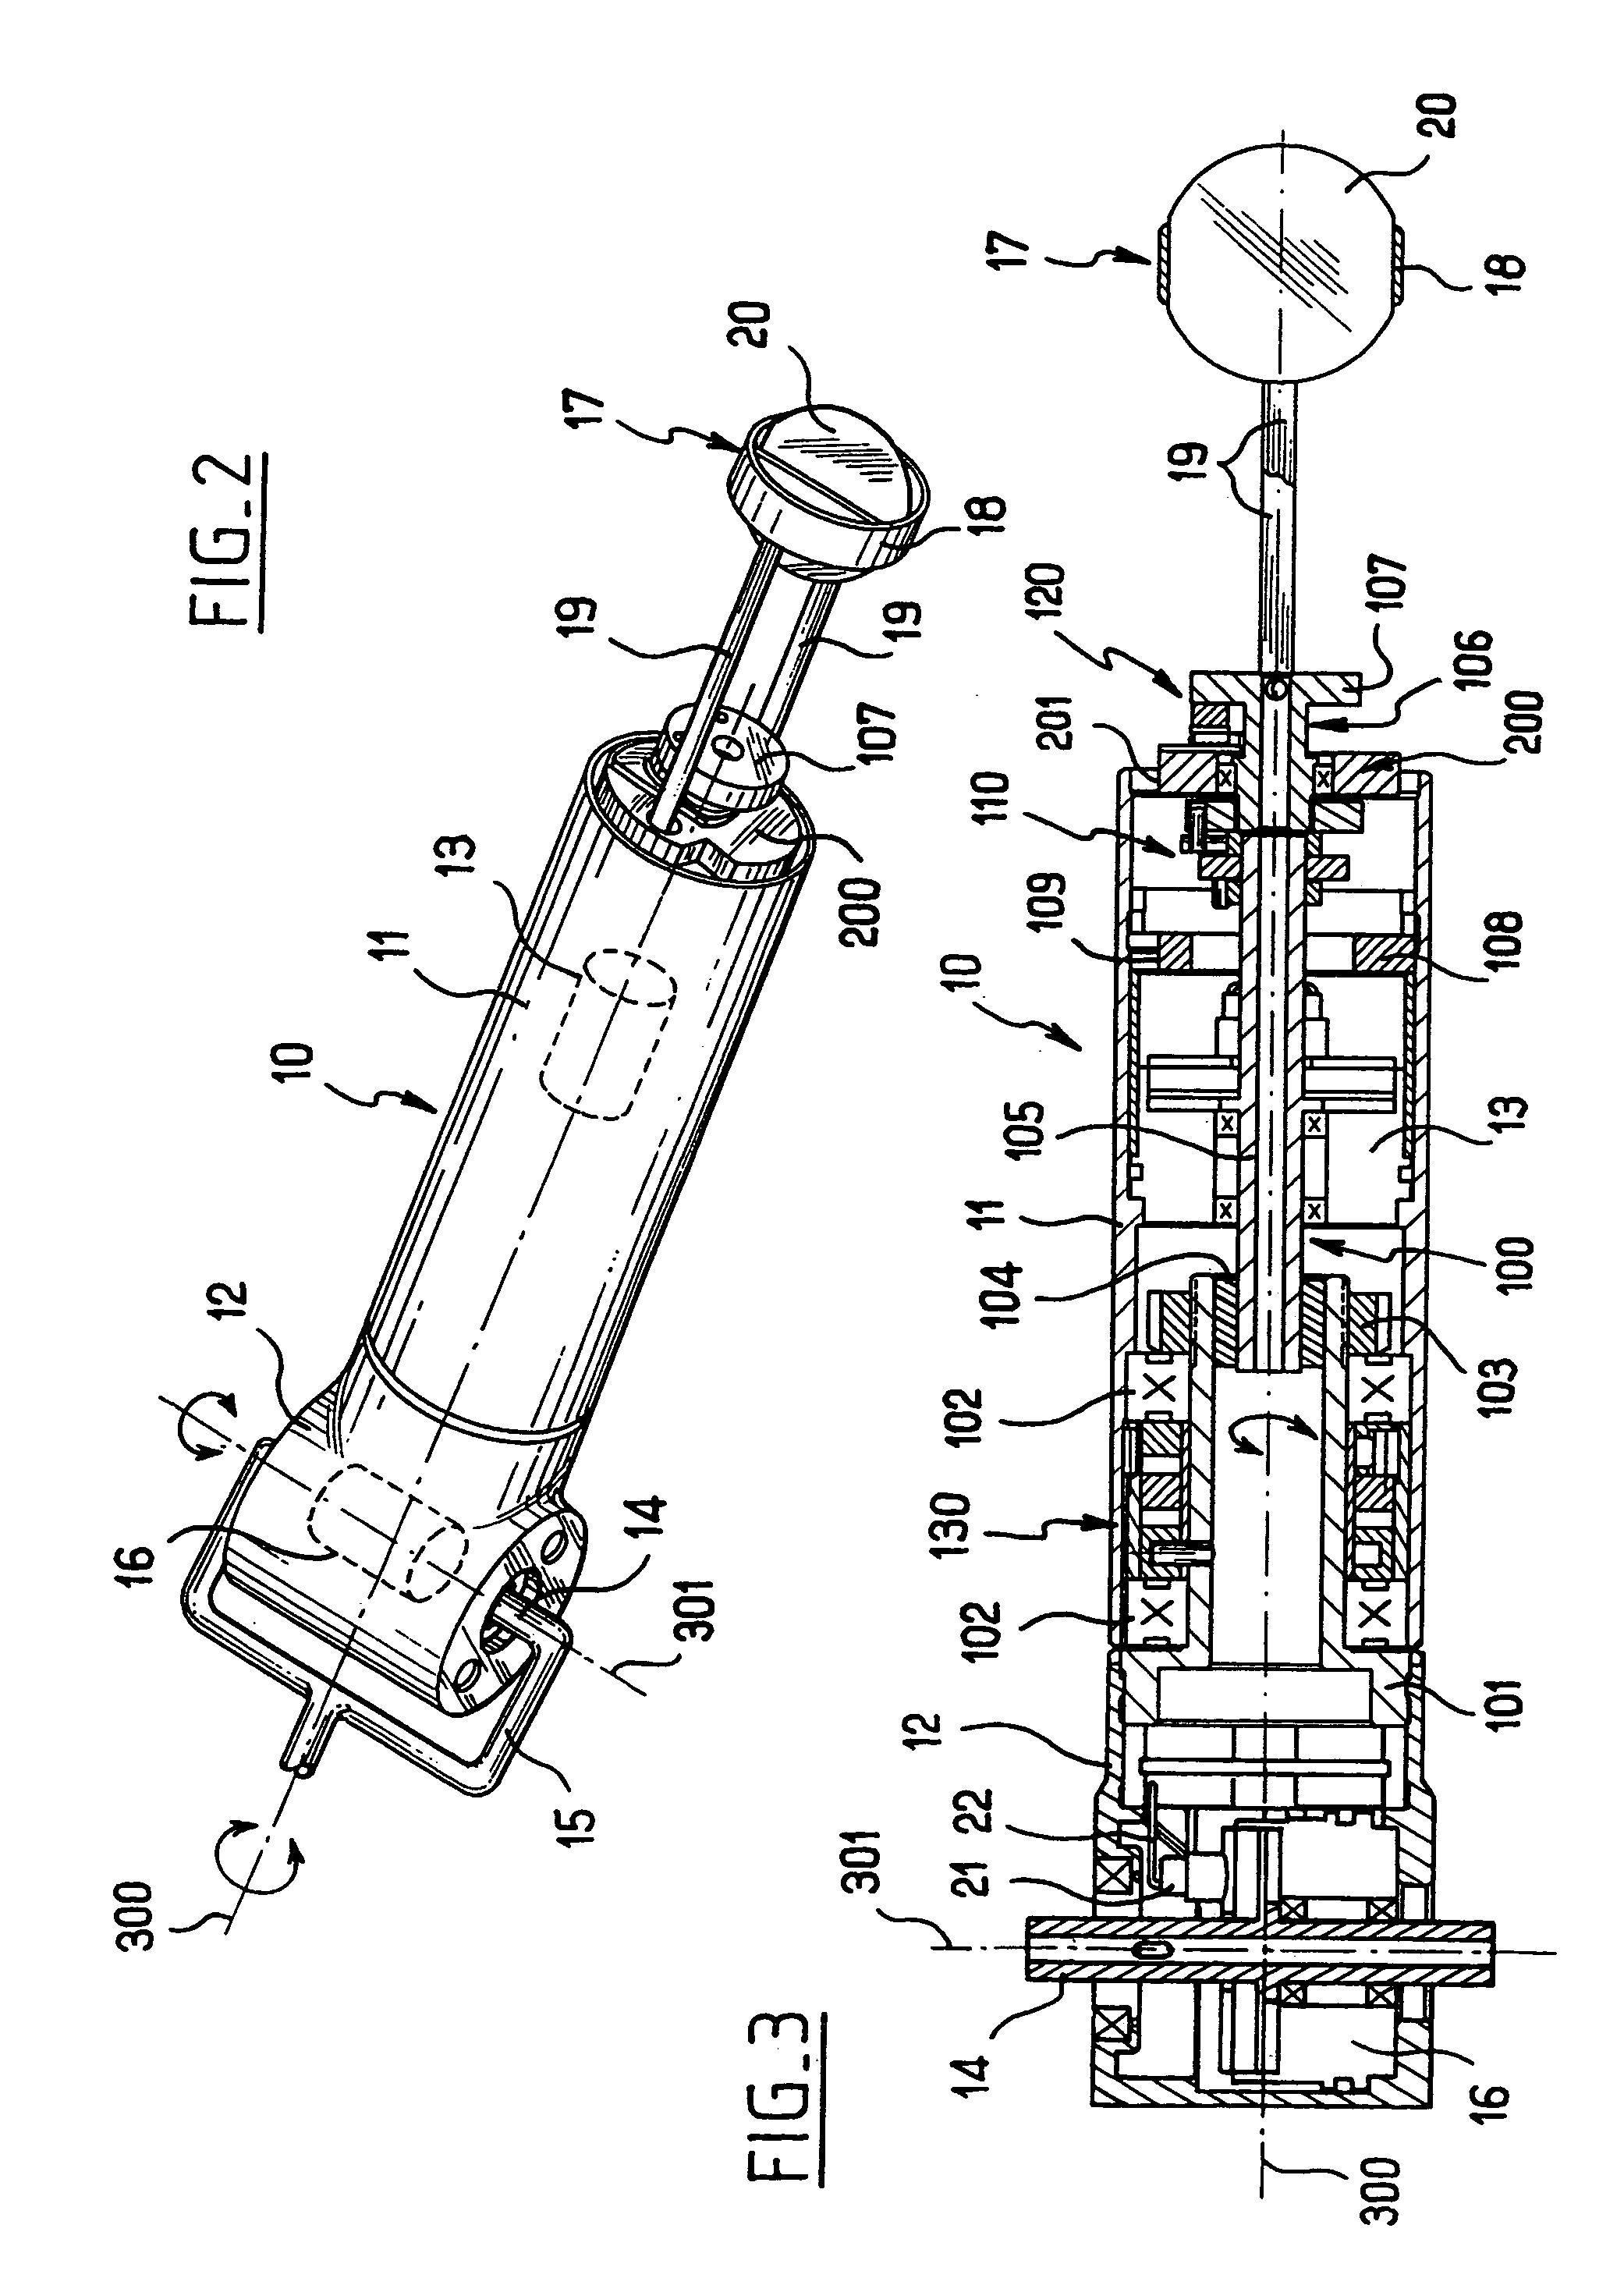 Connection device associated with an arm of an articulated three-dimensional measuring appliance